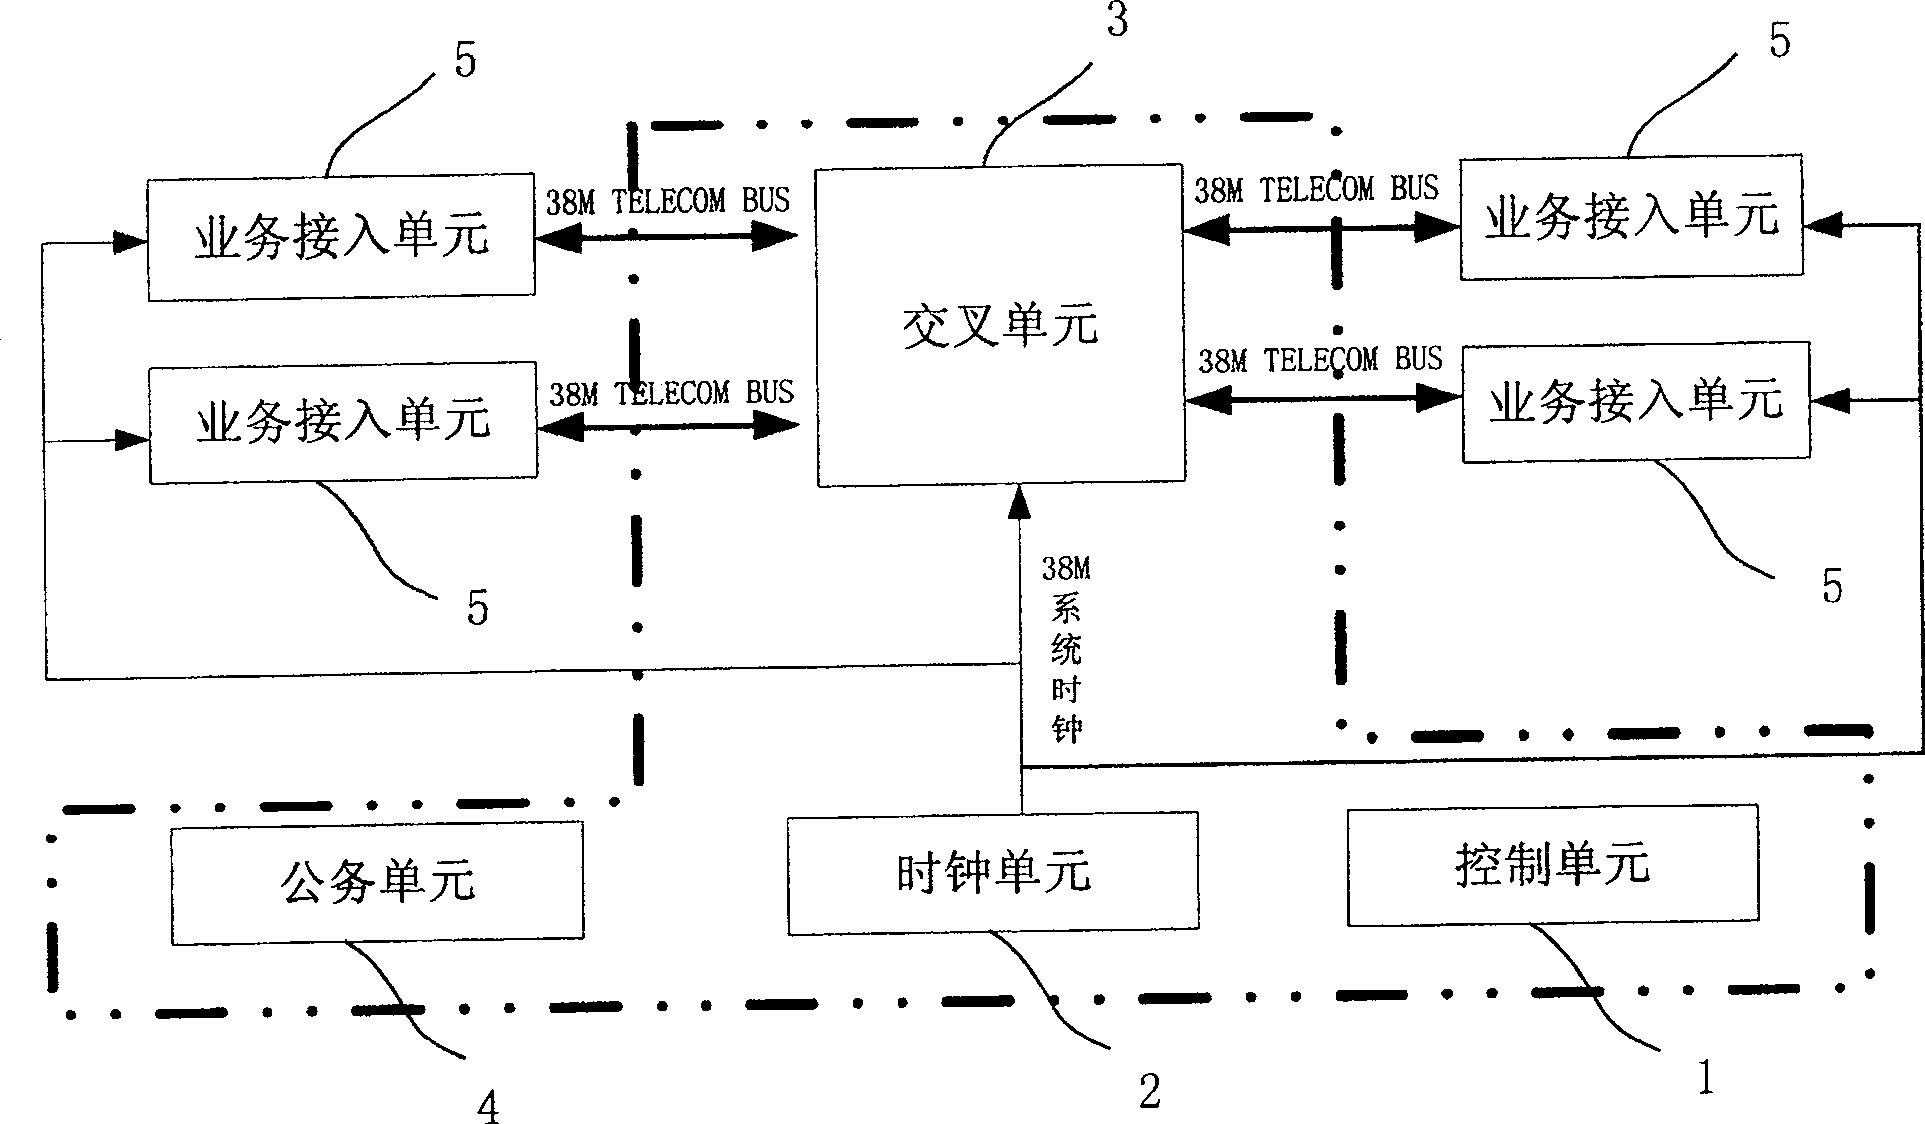 Synchronous digit transmission equipment and method thereof